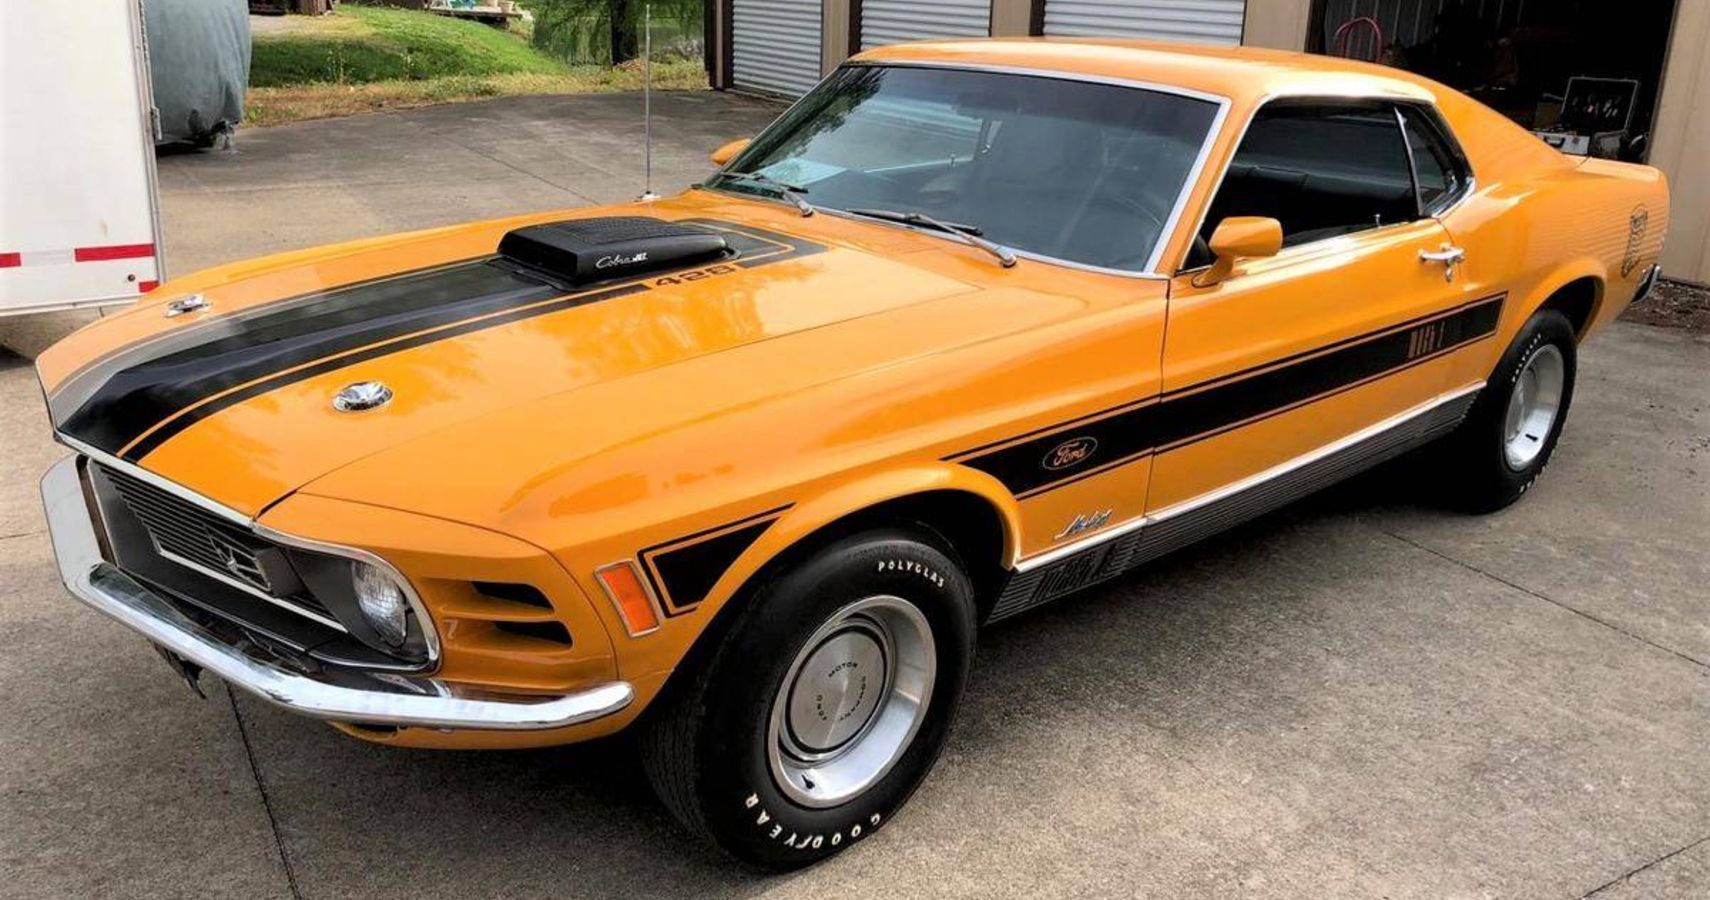 1-Of-48 1970 Ford Mustang Twister Special Is Ready To Takeoff